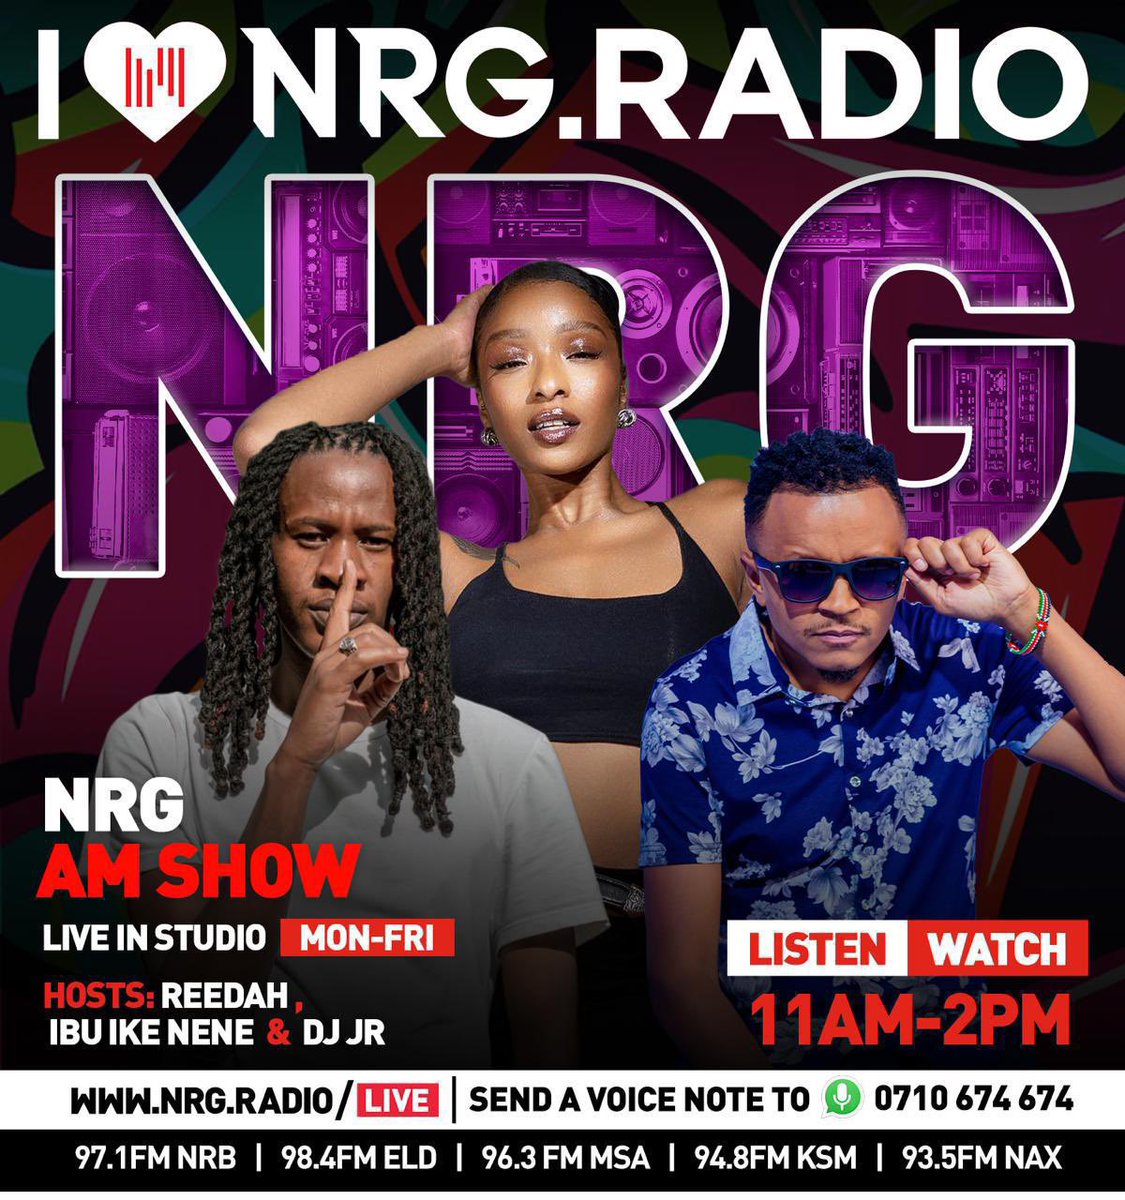 We’re very ready for tusdei! Very ready 😜
Has your person done de ting?🤭
Catch the mid morning gang gang @reedahyvonne Dj Jr. & @IbuIke7 
#PaylessRadio #NRGAMShow